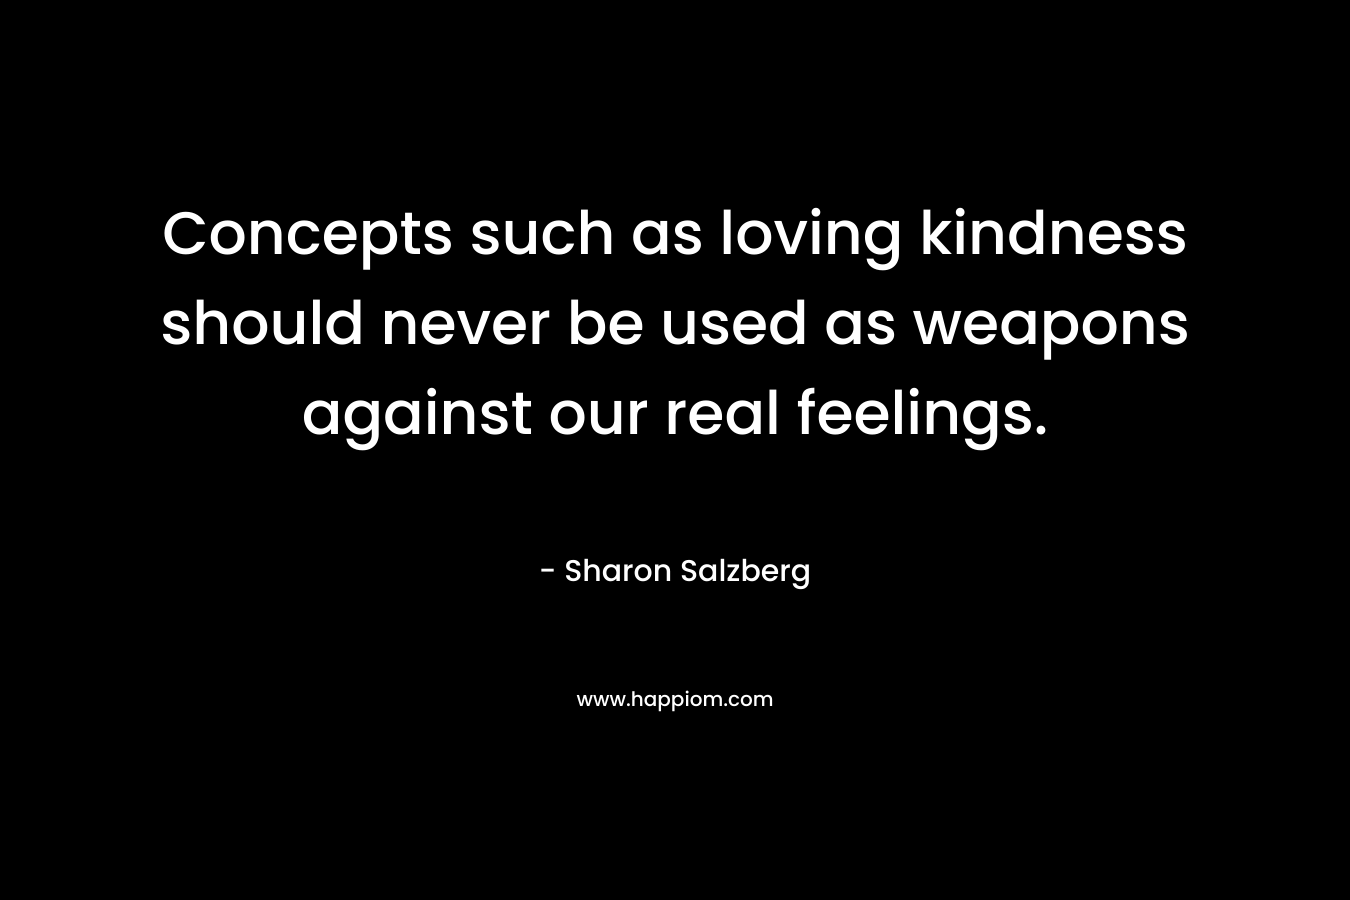 Concepts such as loving kindness should never be used as weapons against our real feelings. – Sharon Salzberg